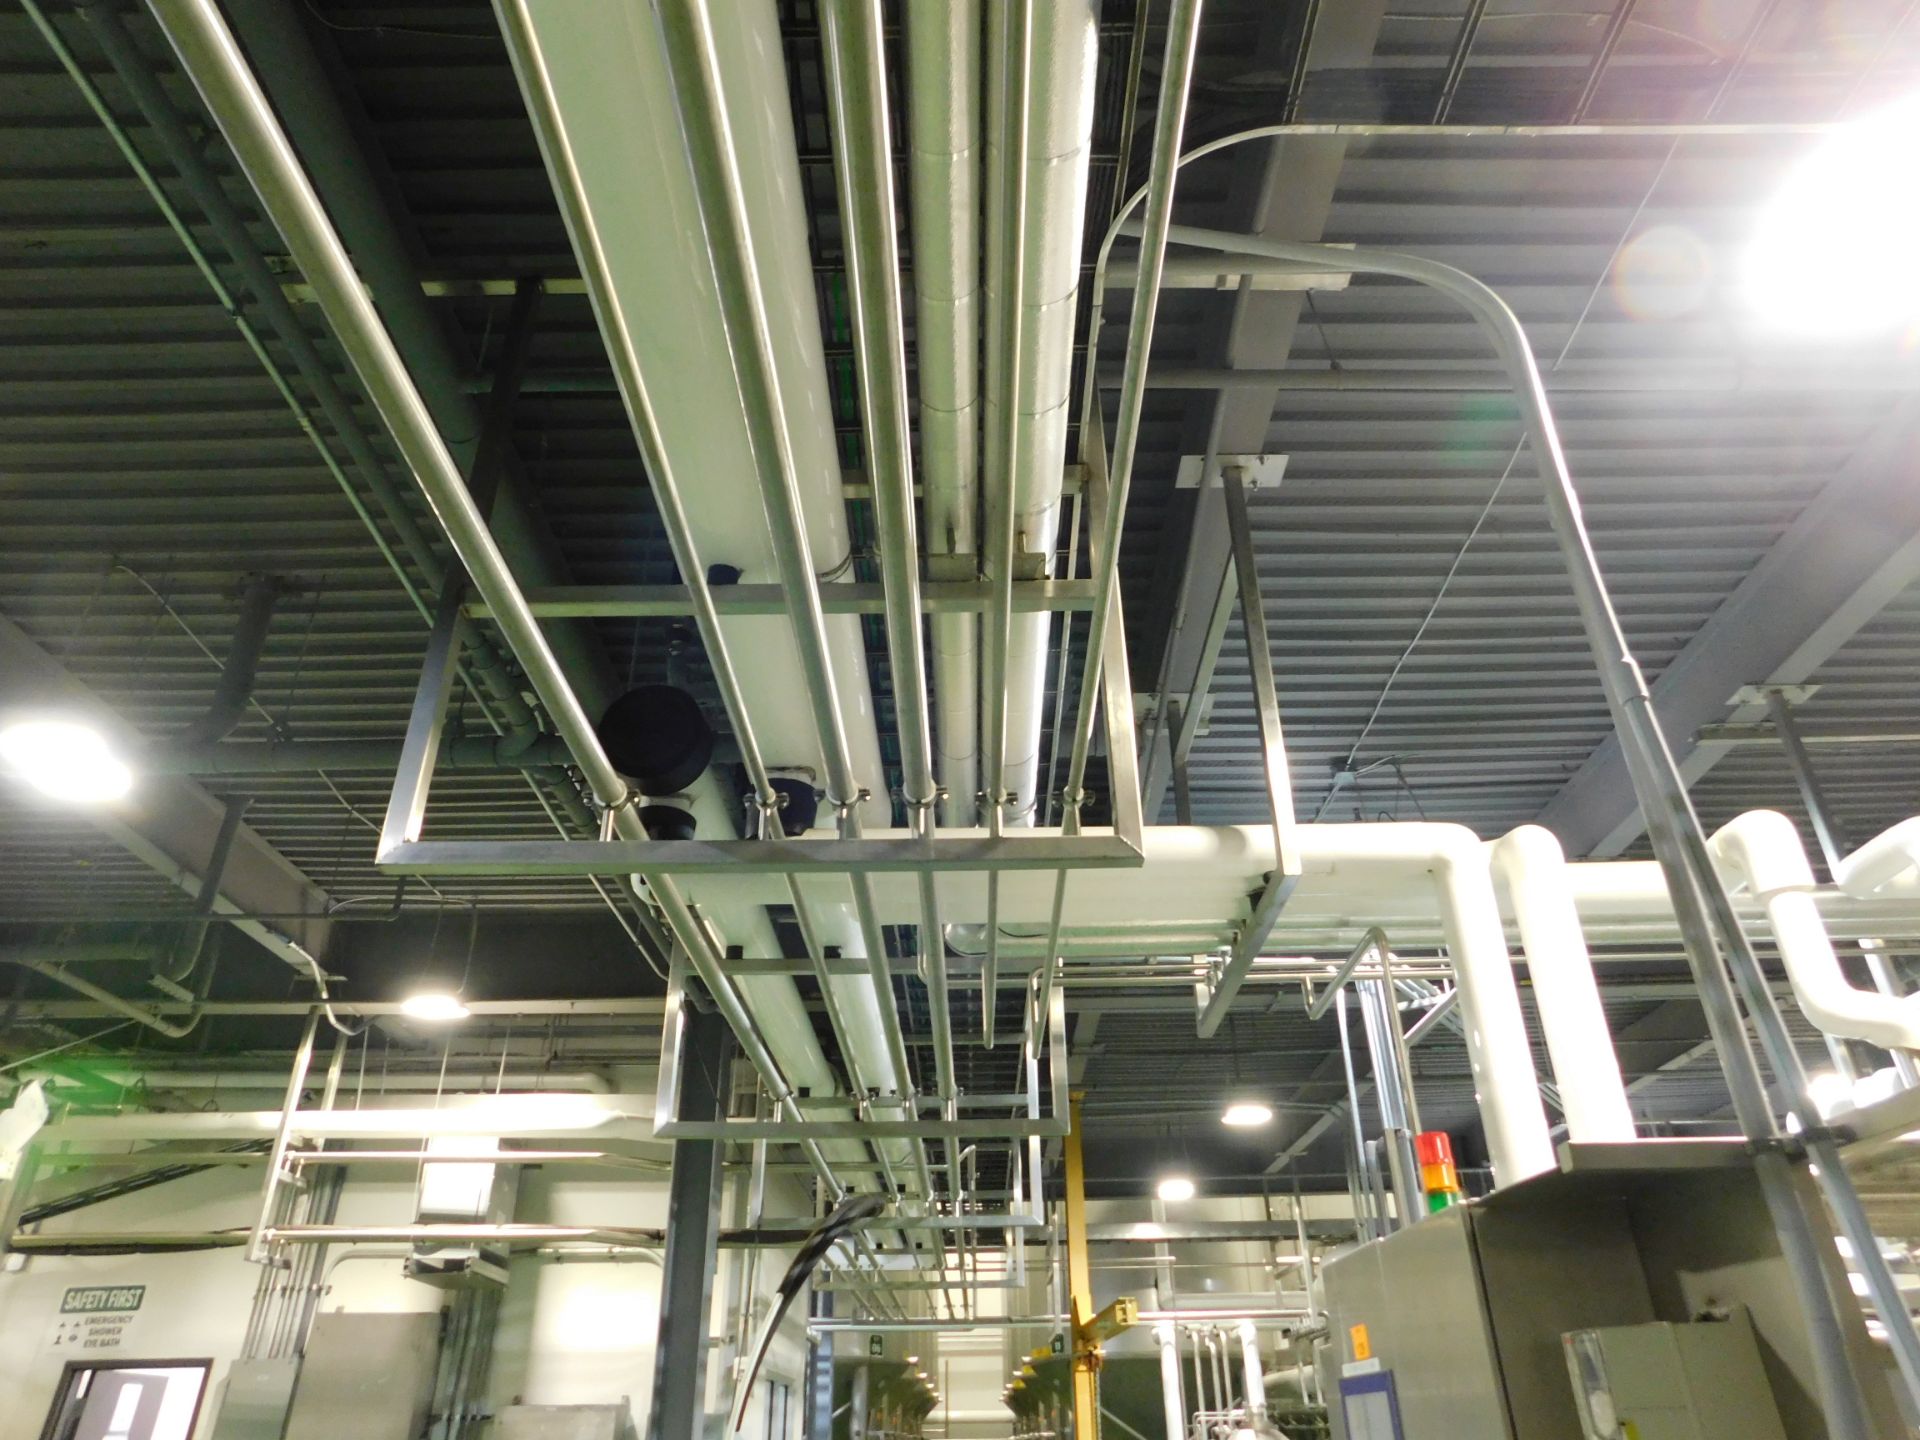 Stainless Steel Piping - Image 12 of 15